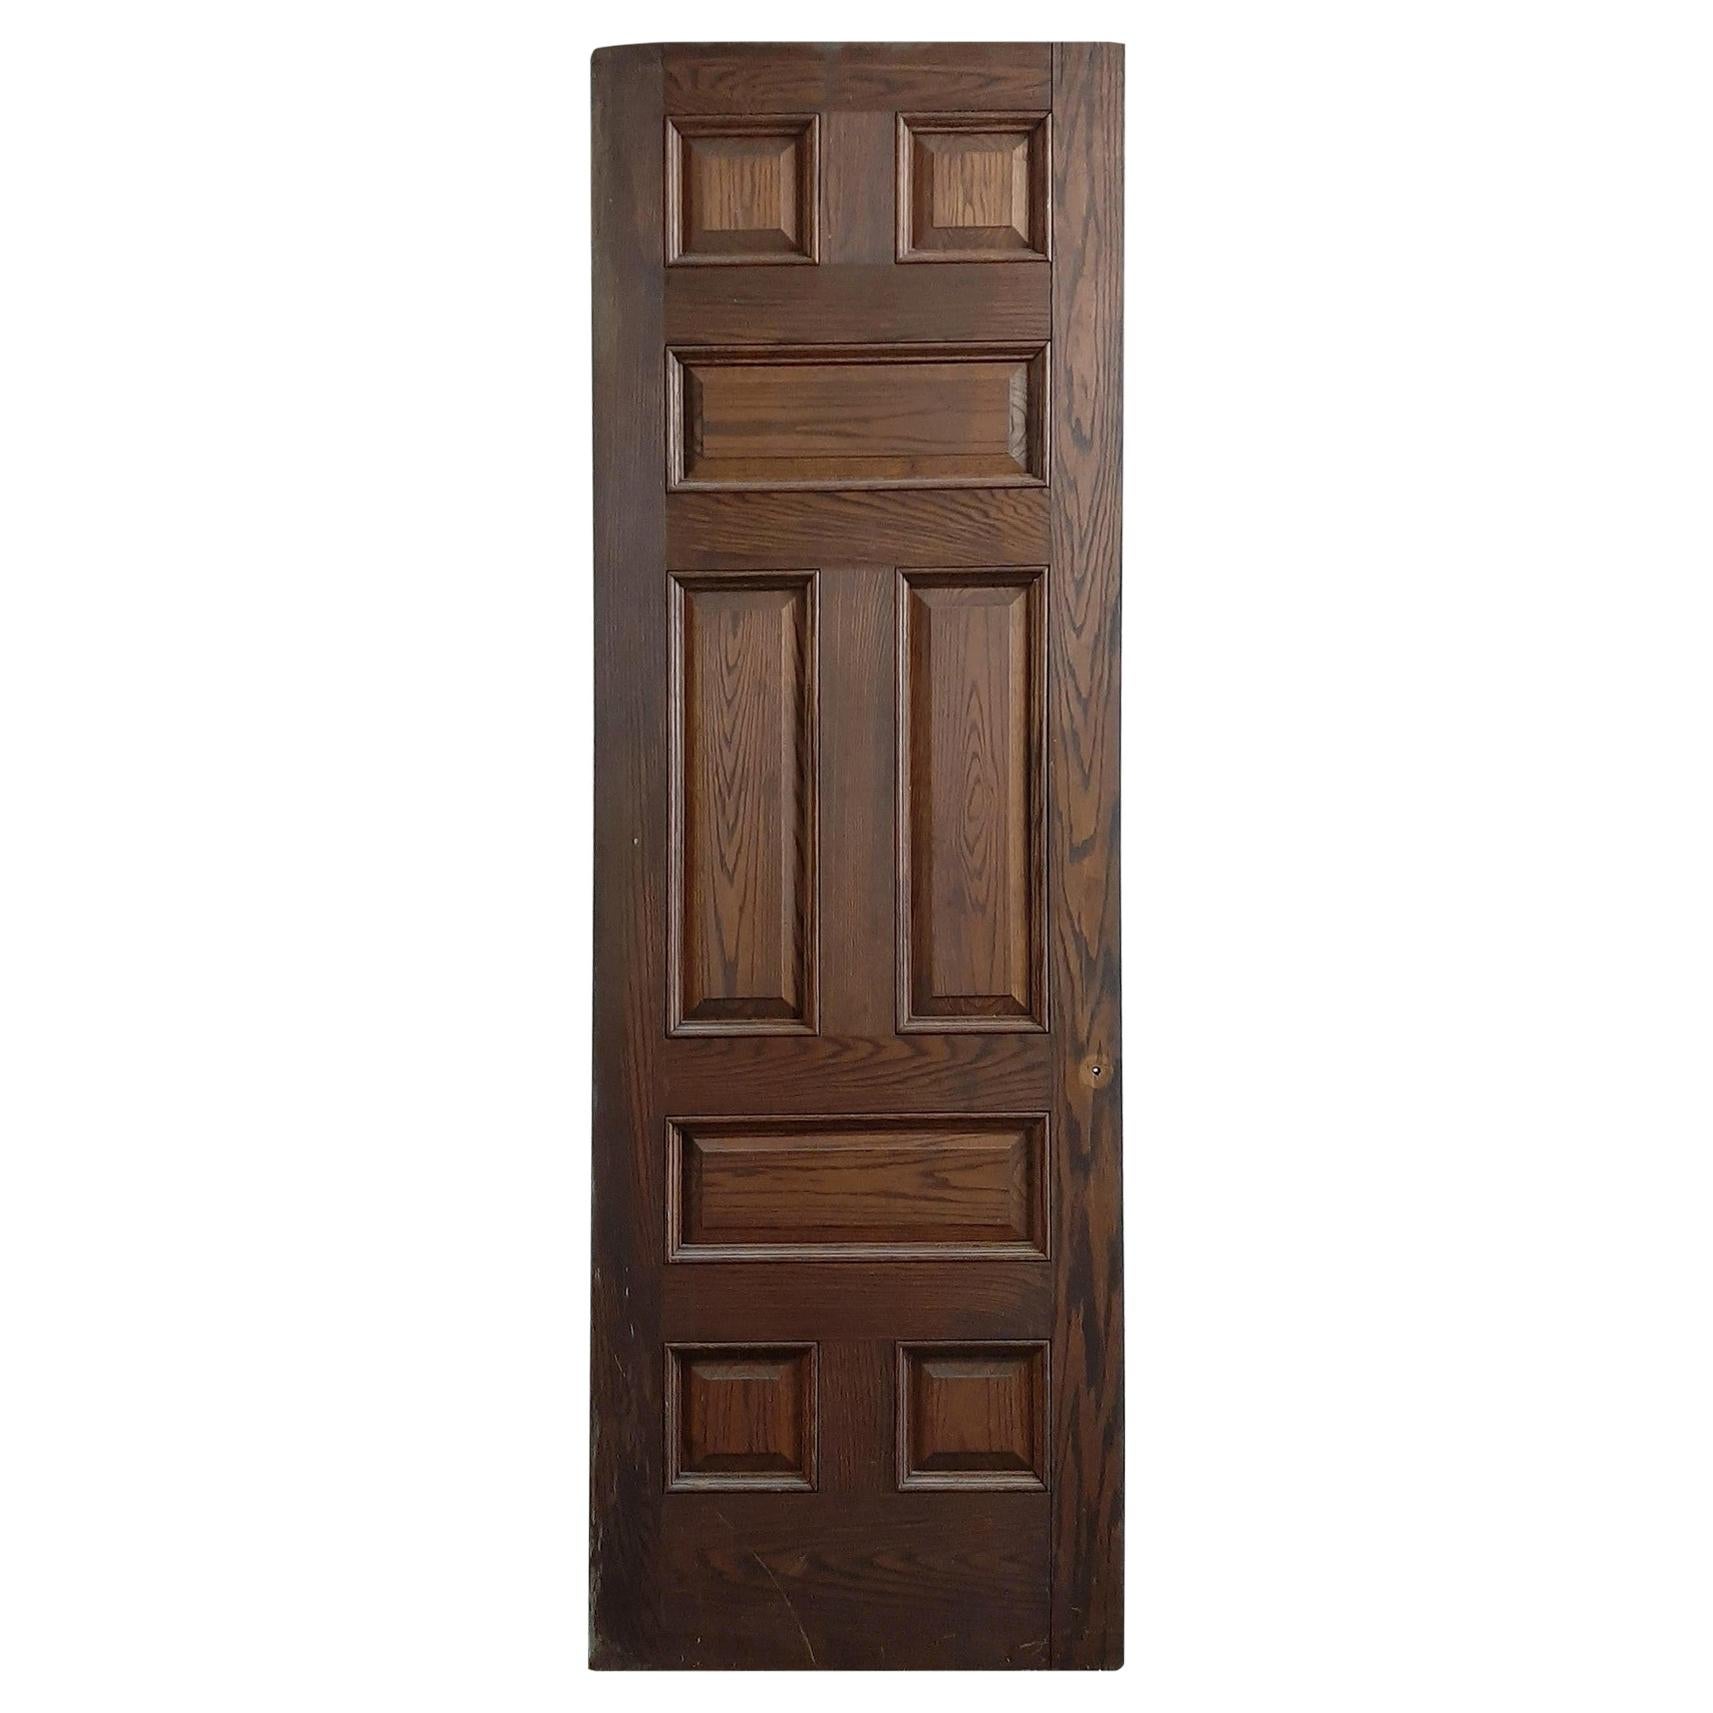 Early 20th C 8 Pane Oak Passage Door from NYC